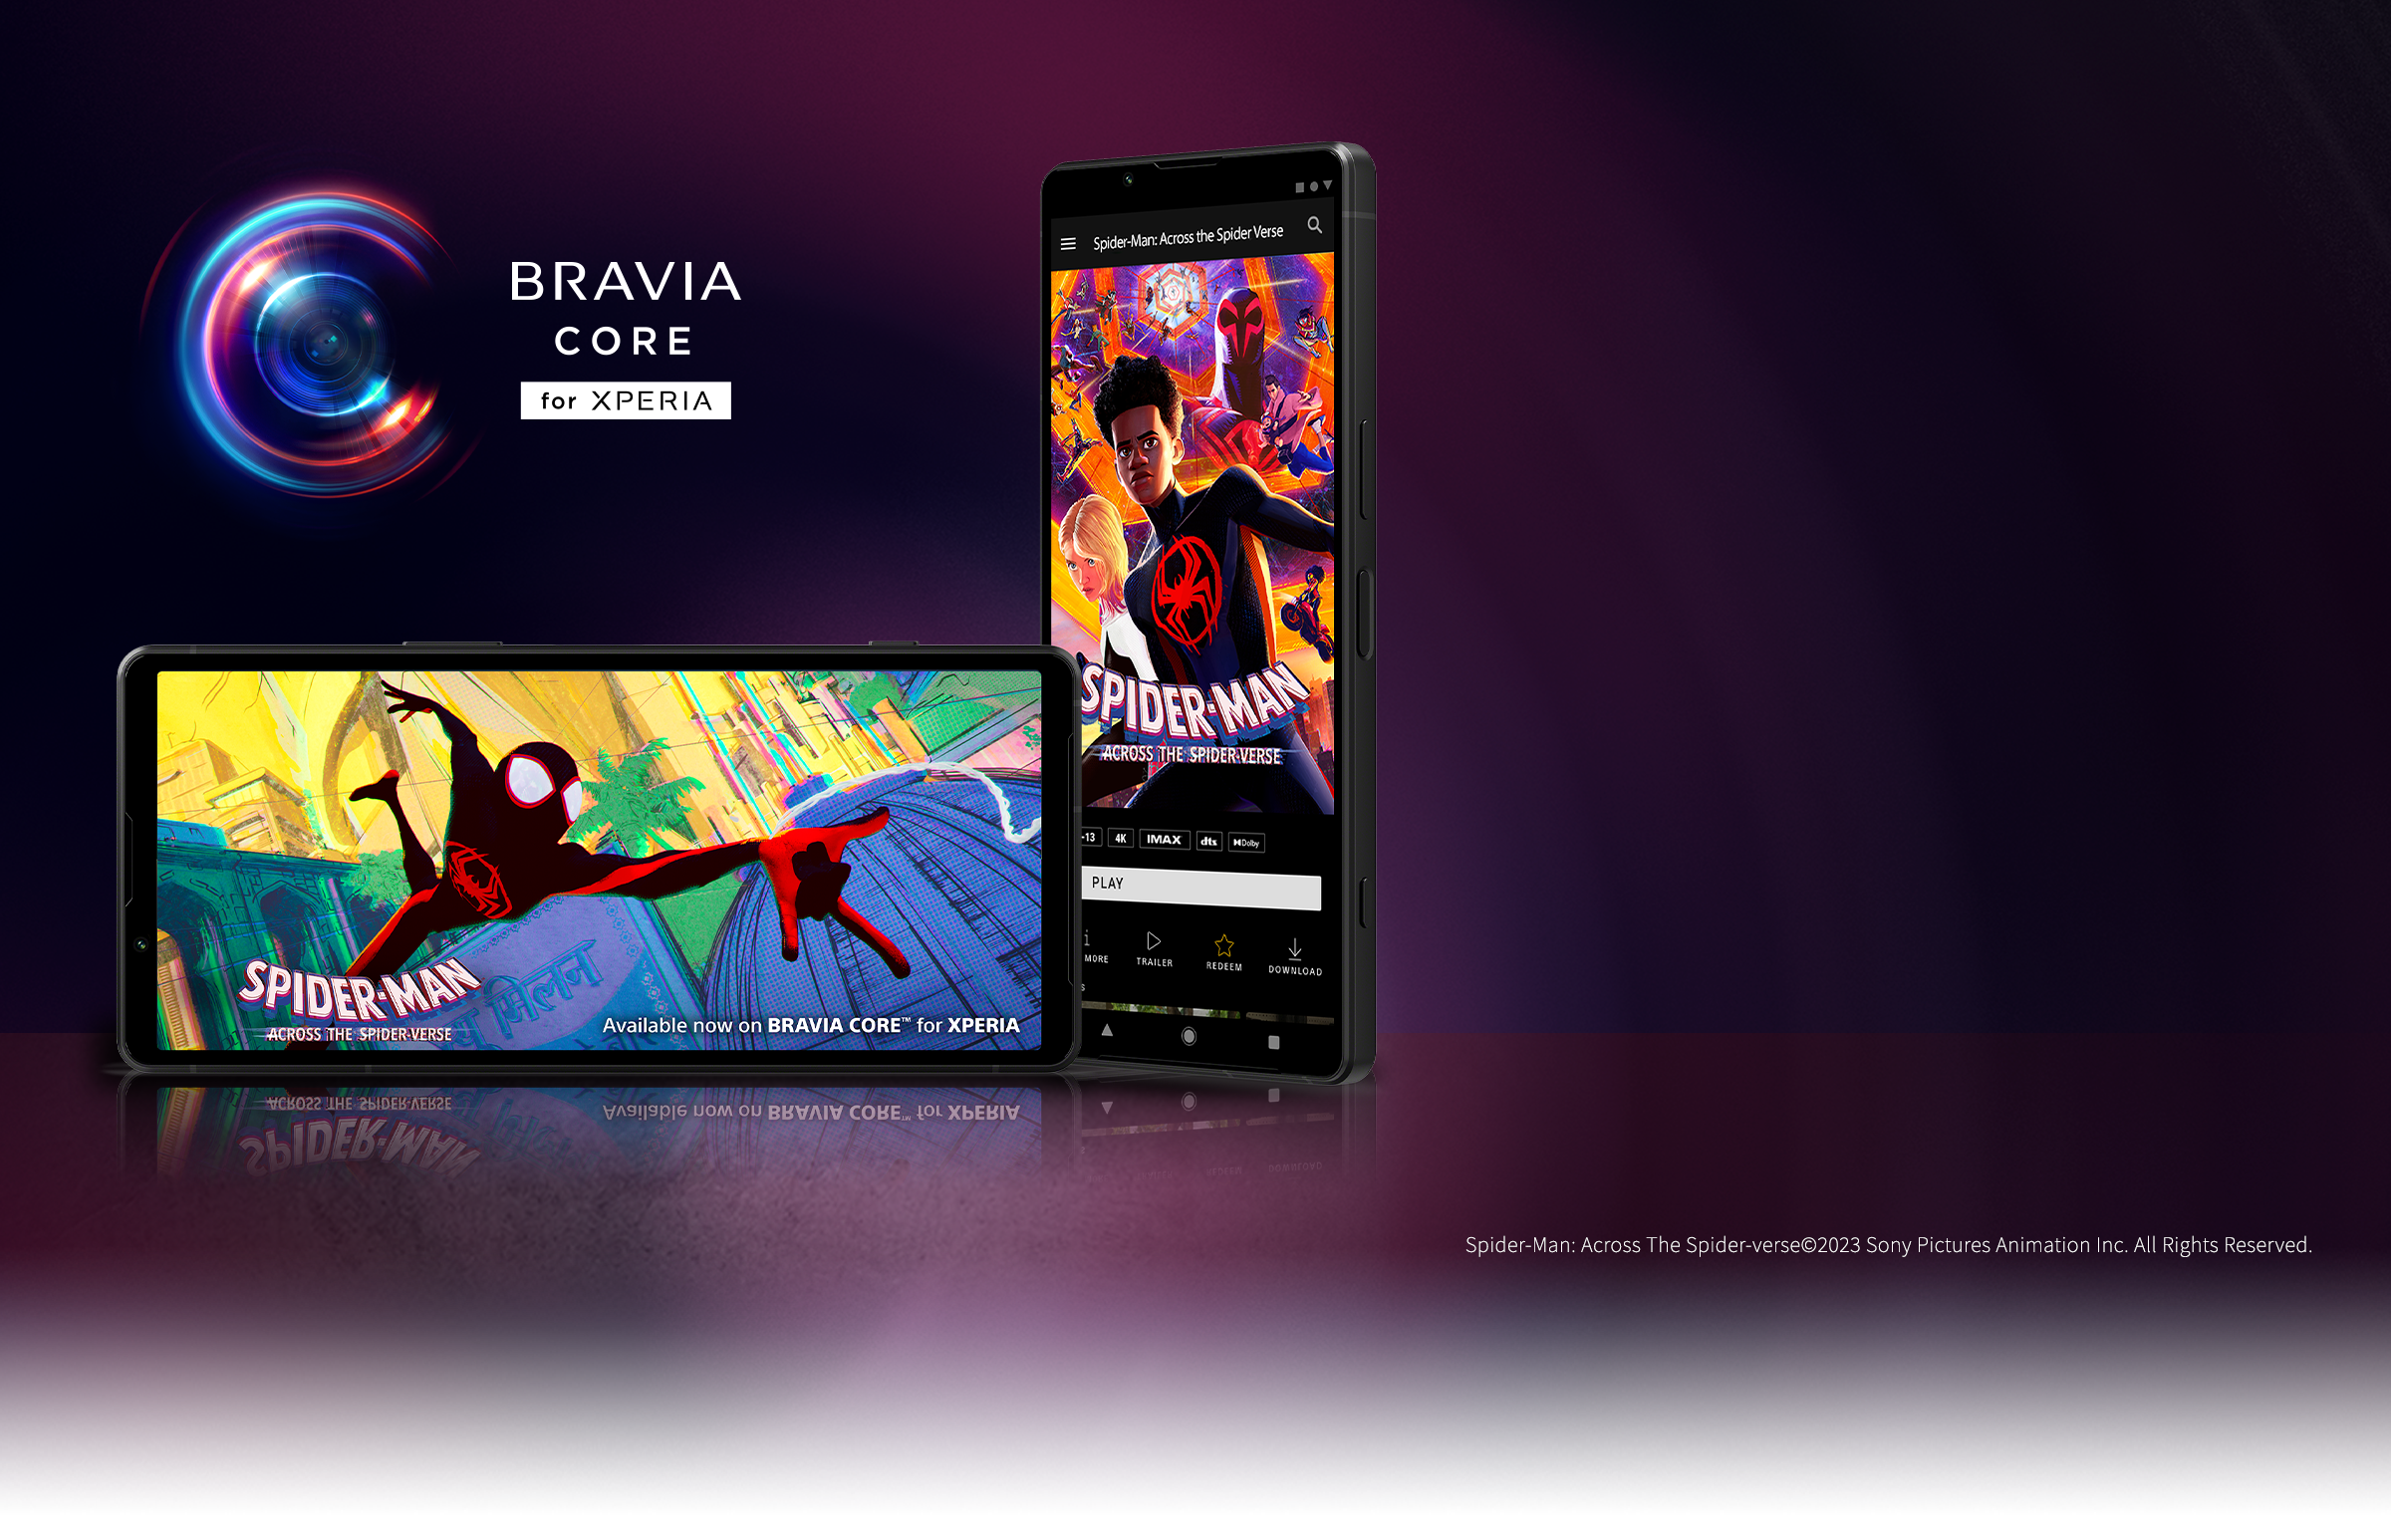 BRAIA CORE for Xperia SPIDER-MAN For From Home Available now on BRAVIA CORE ™ for Xperia © 2019 Columbia Pictures Industries, Inc. All Rights Reserved. | MARVEL and all related character names: © & ™ 2021 MARVEL.